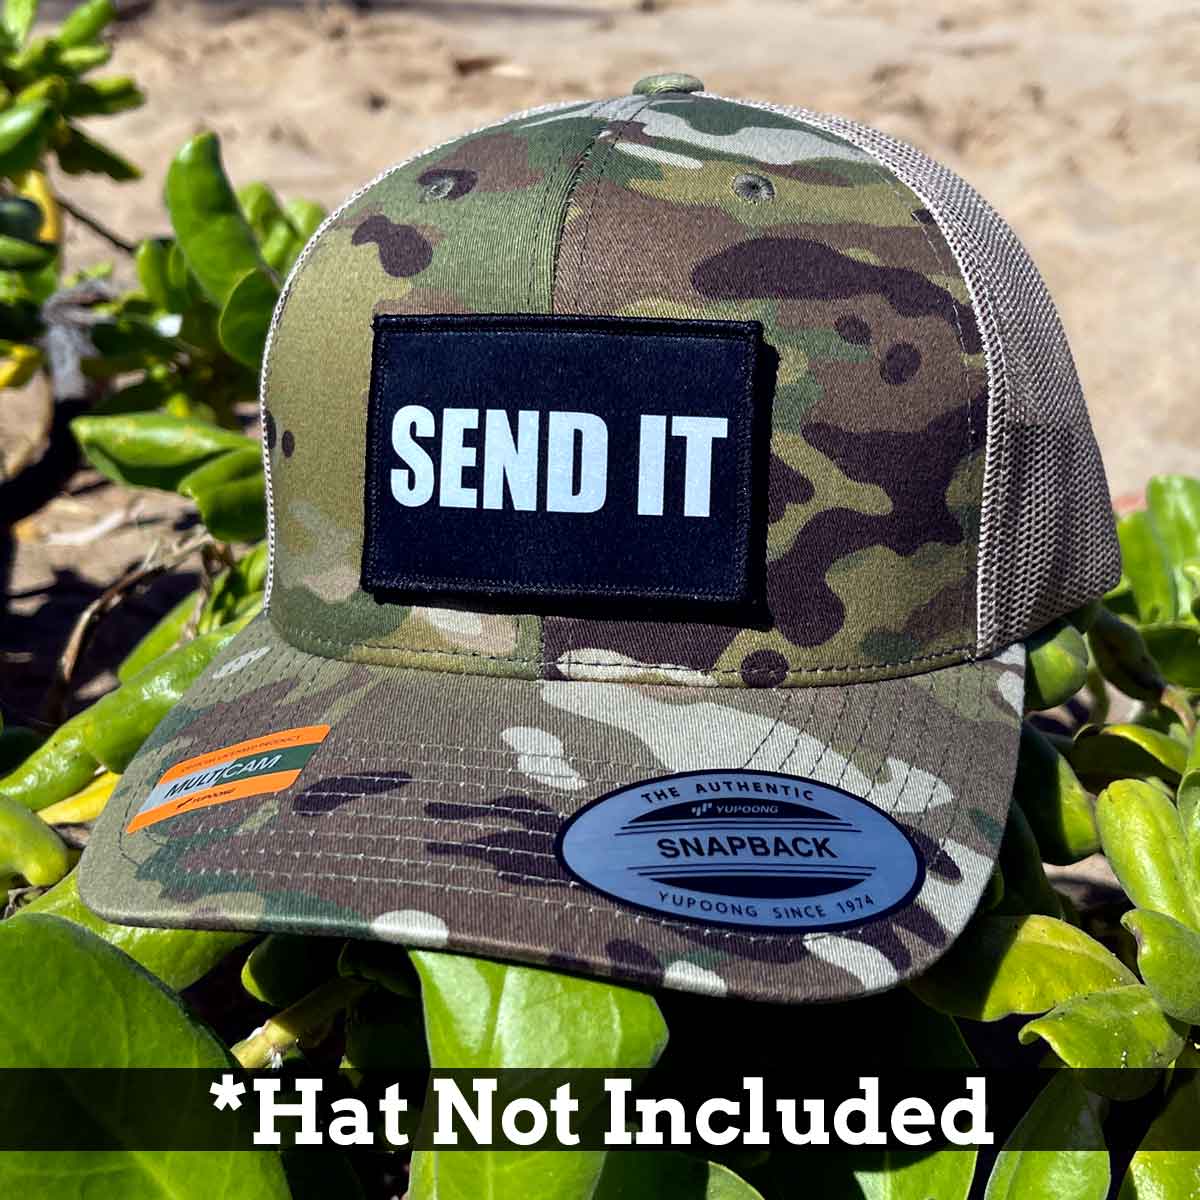 Send It - Removable Patch - Pull Patch - Removable Patches For Authentic Flexfit and Snapback Hats